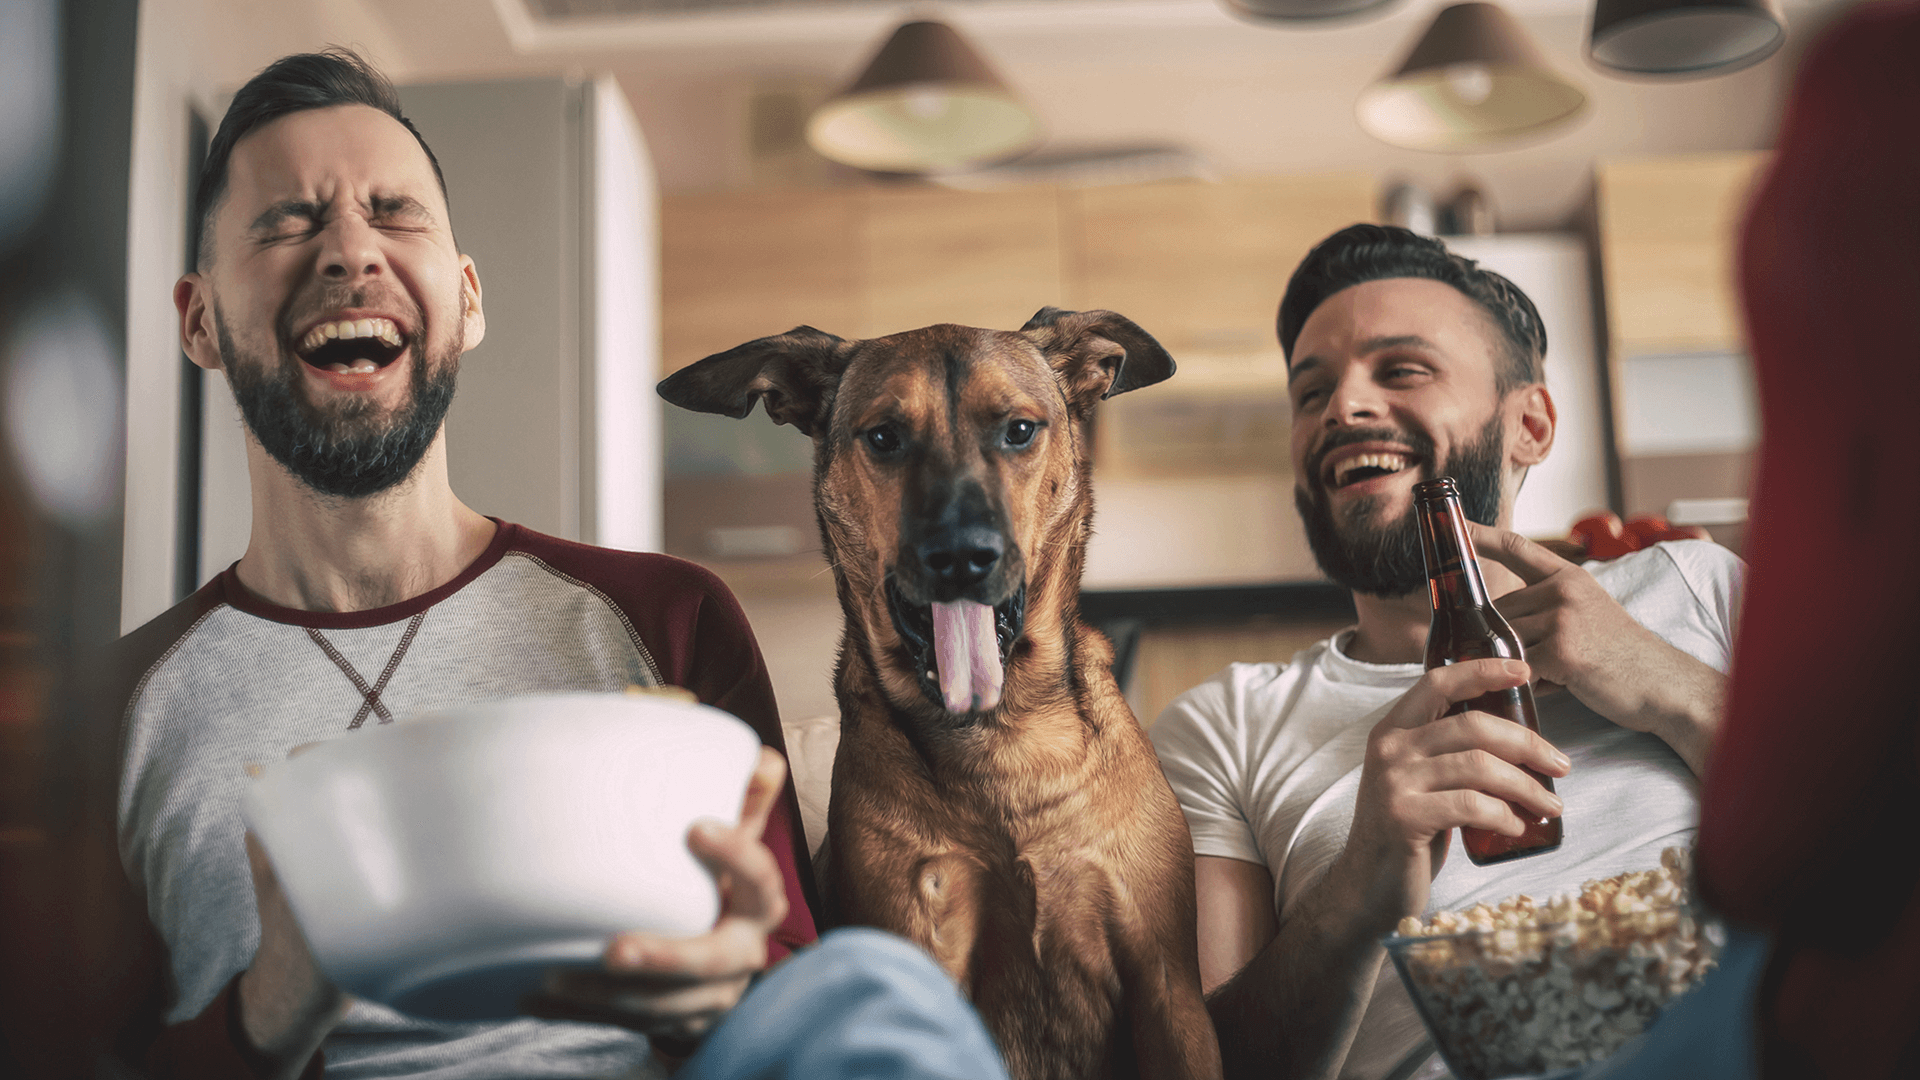 two men smiling with a dog in between them